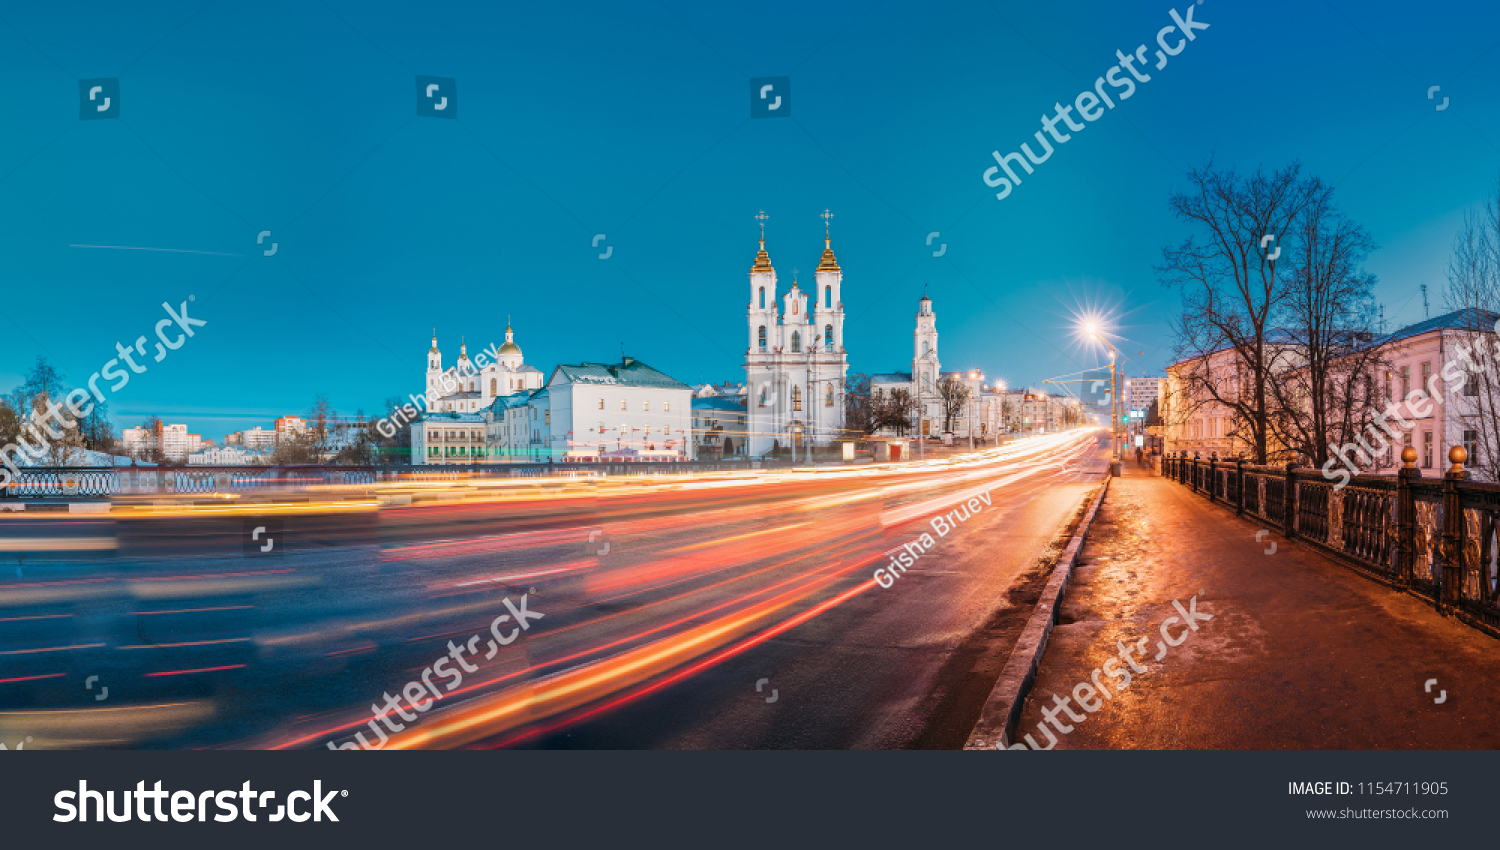 Vitebsk, Belarus. Panorama Of Evening Or Night View Of Famous Landmarks Is Assumption Cathedral, Church Of Resurrection Of Christ And Old Town Hall In Street Lights Illumination. Traffic Light Trails #1154711905